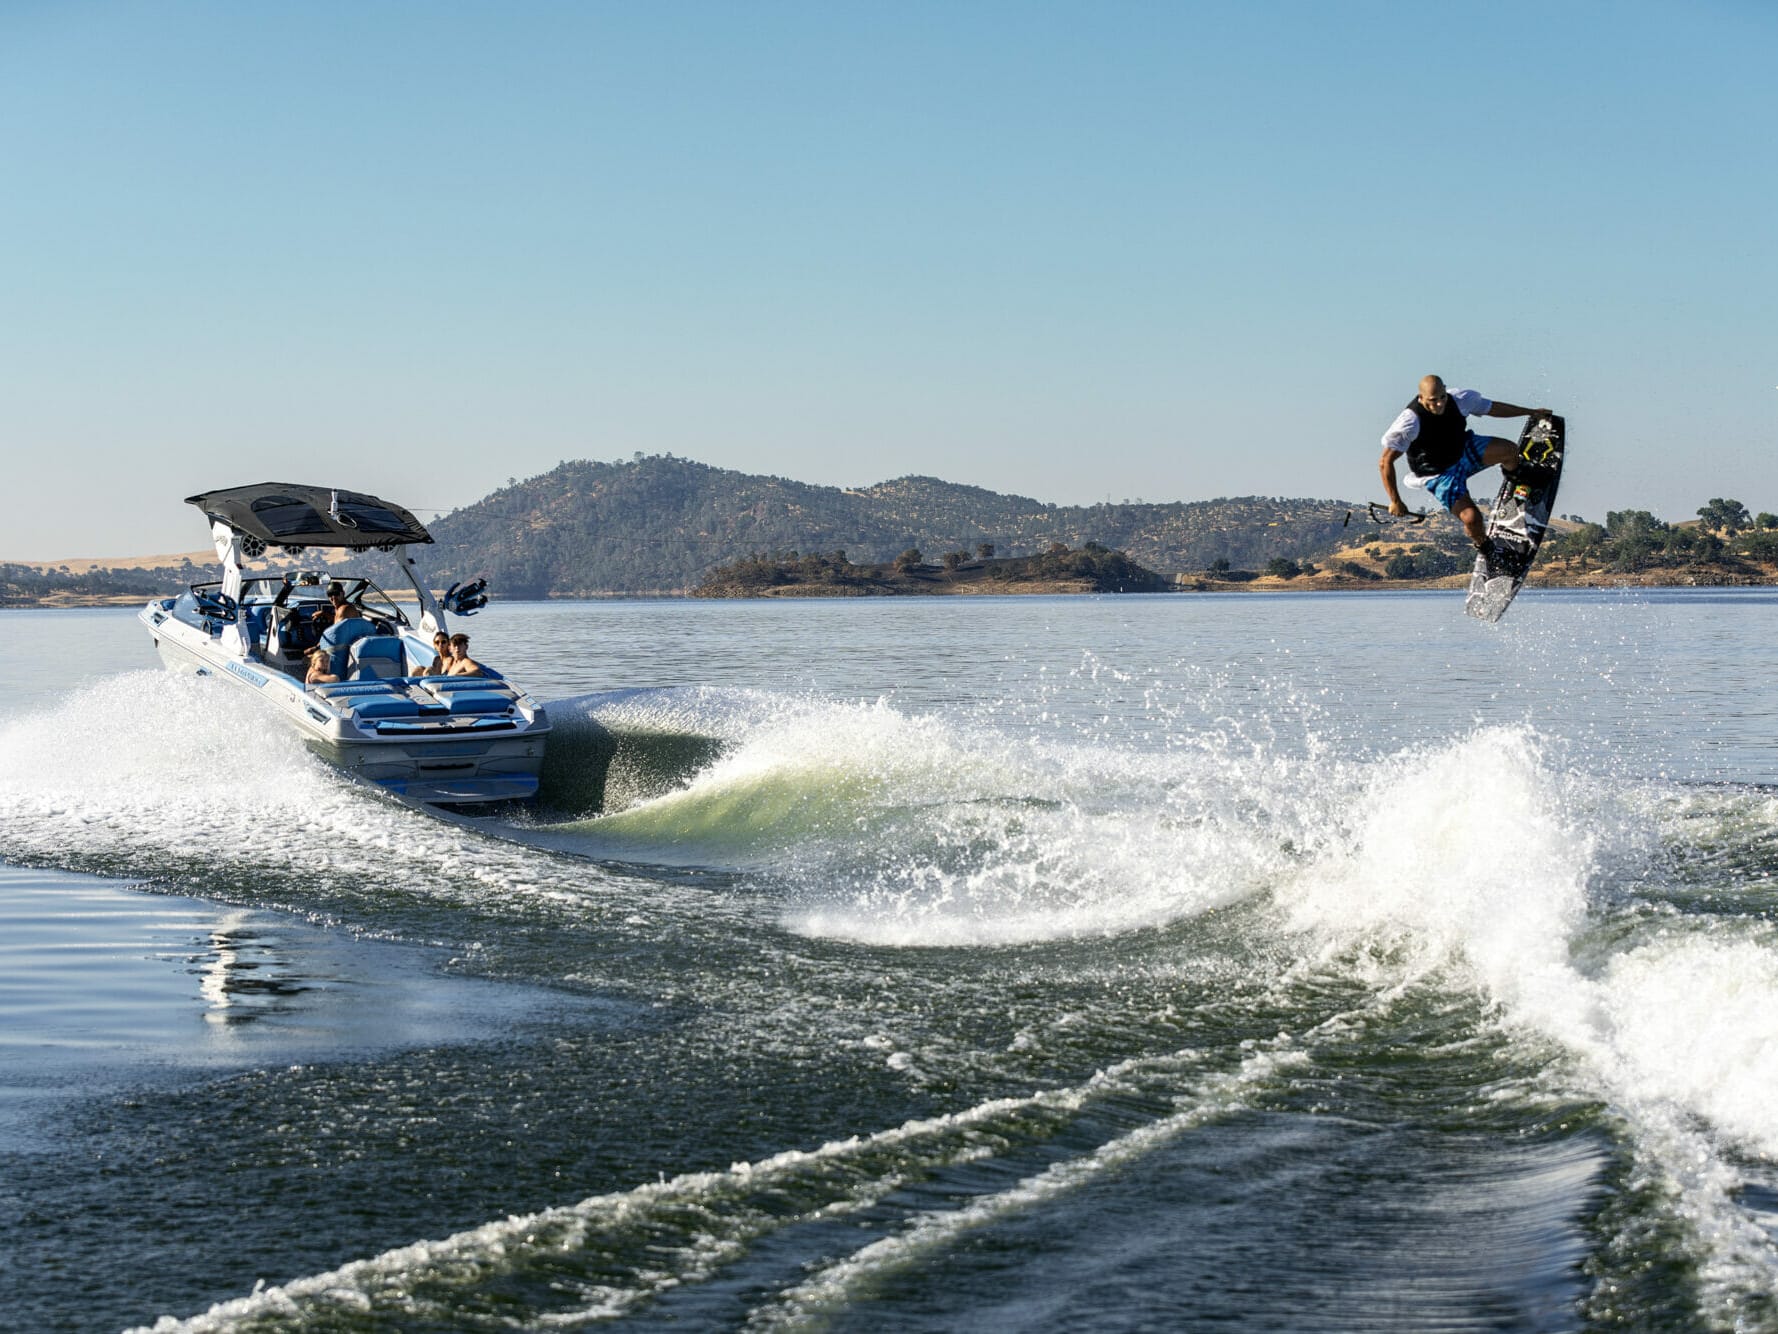 A man is riding a wakesurf board on a boat.